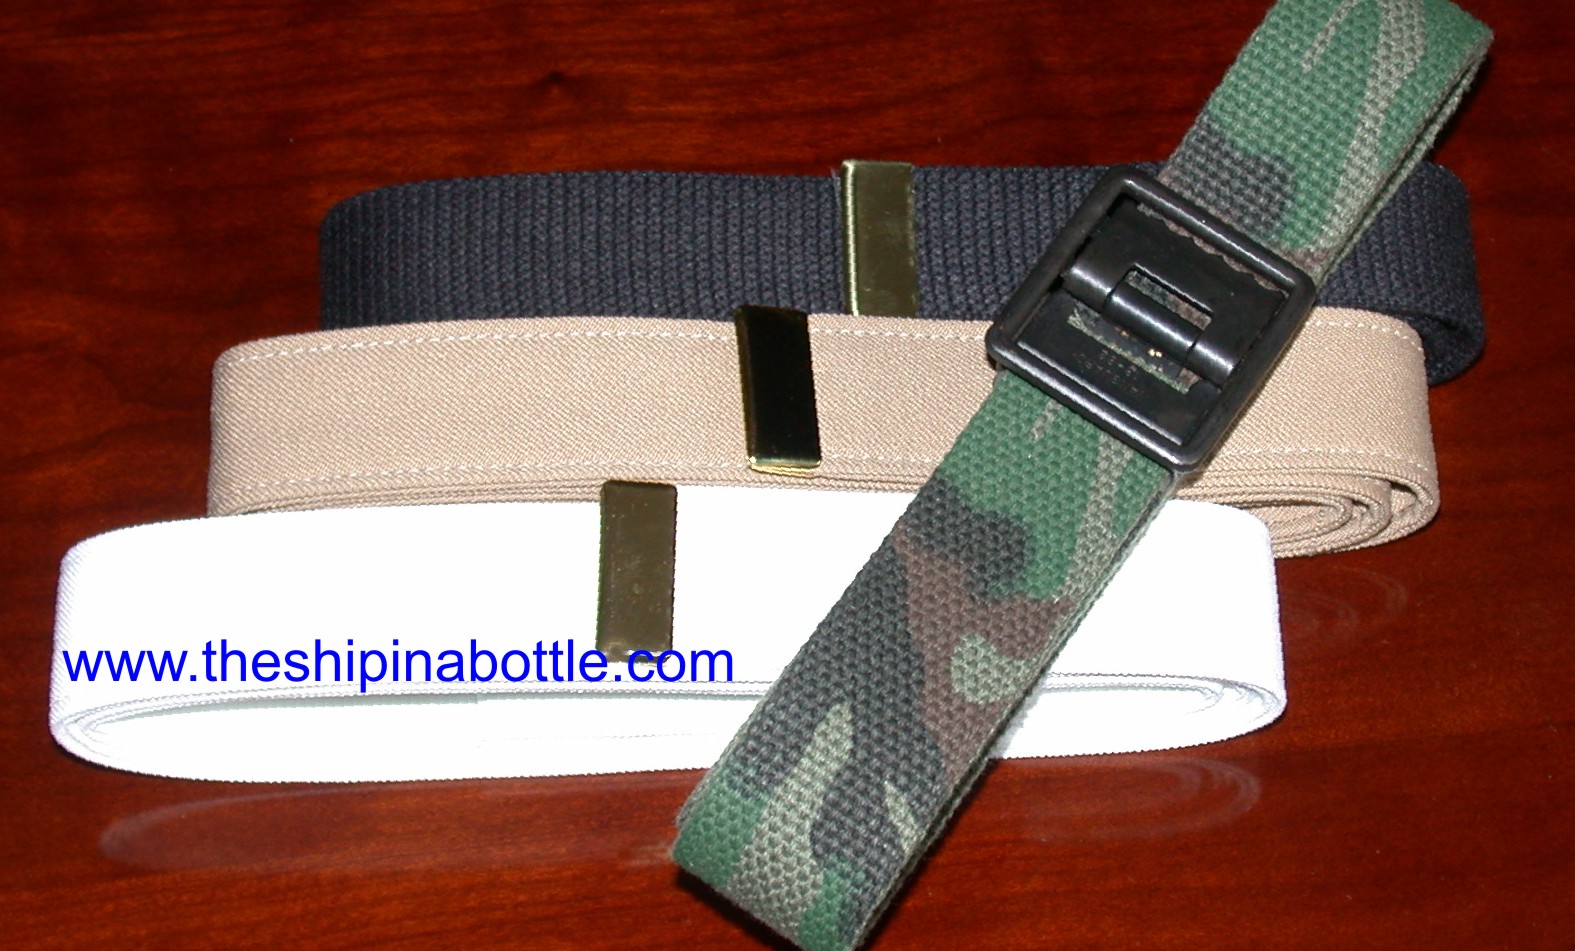 Authentic US Navy and SEABEE Belts - www.theshipinabottle.com